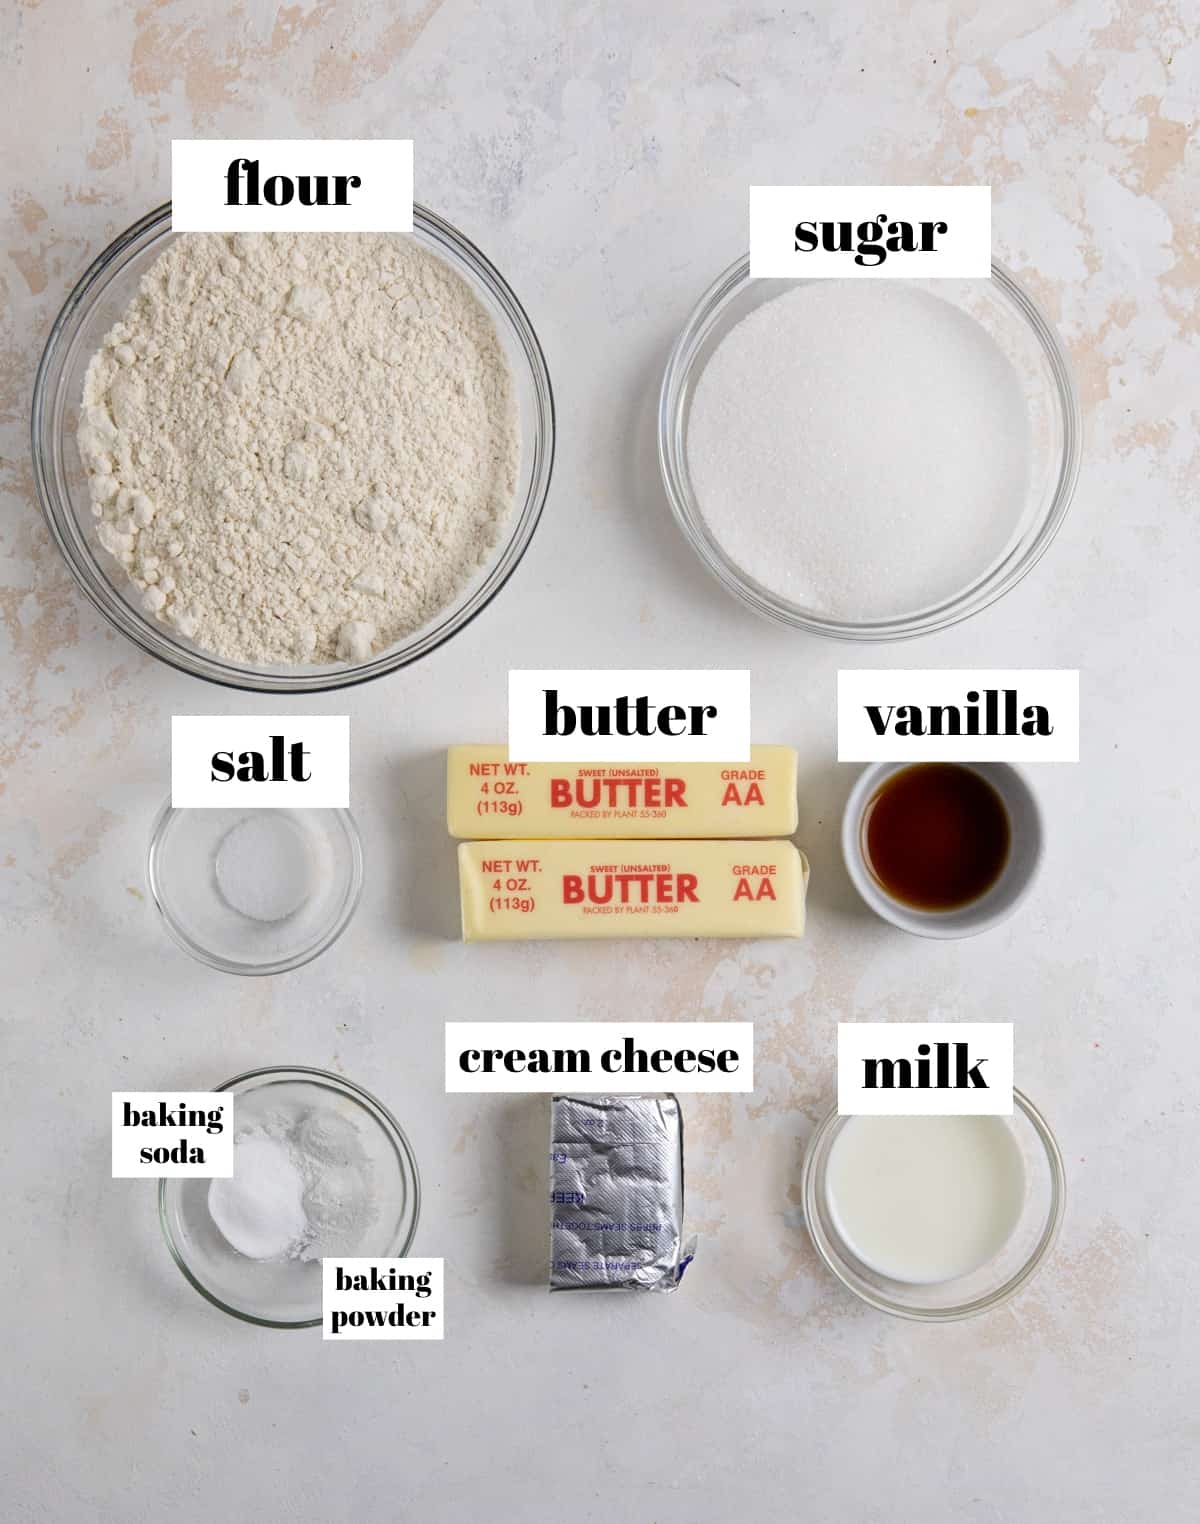 Flour, milk, cream cheese, baking soda and other ingredients to make cookie recipe.